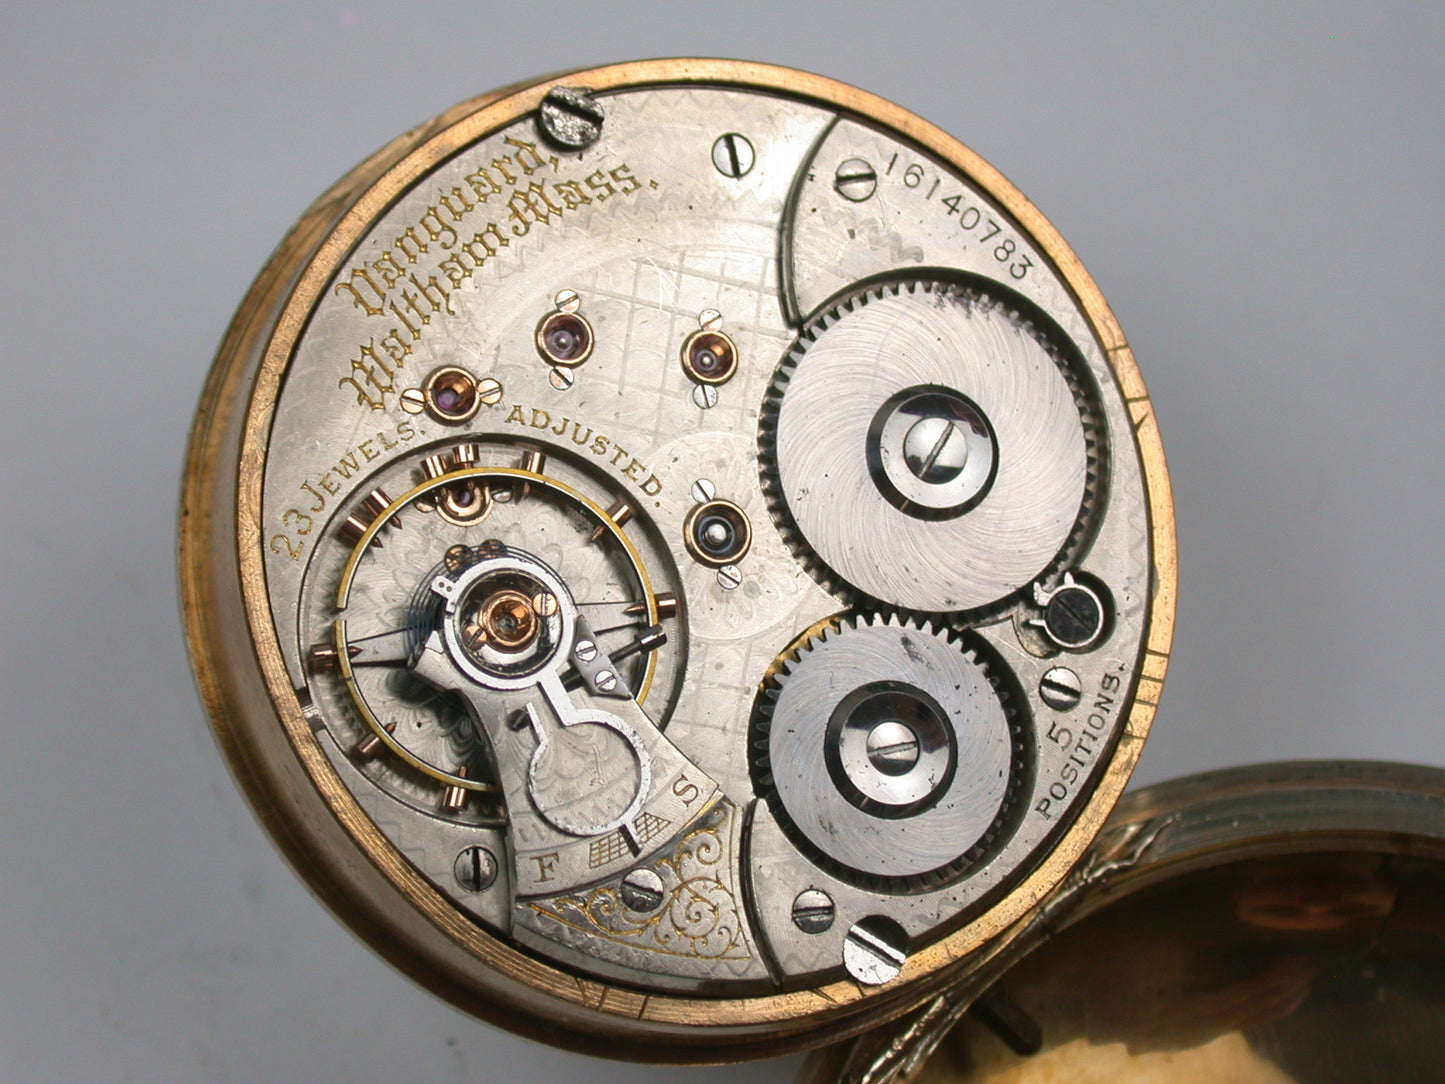 Waltham 18 Size Model 1892 Open Face 23 Jewel Vanguard with 24 Hour Canadian Railroad Dial